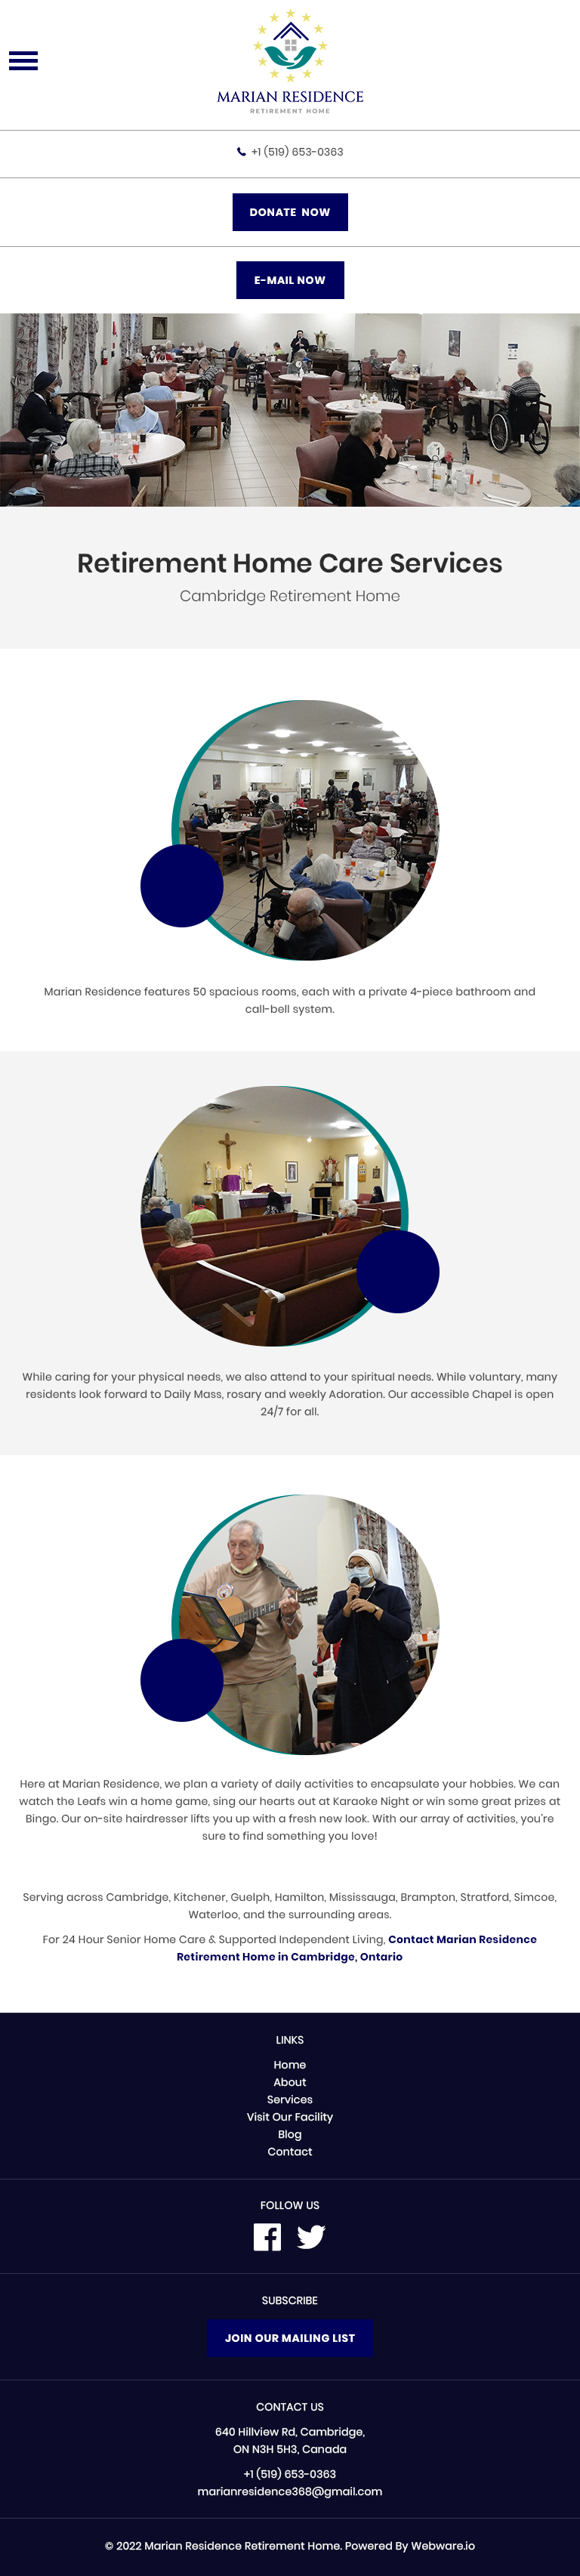 M-Serviceshttps://marian-residence-retirement-home.webware.io/pages/mock/home-mock